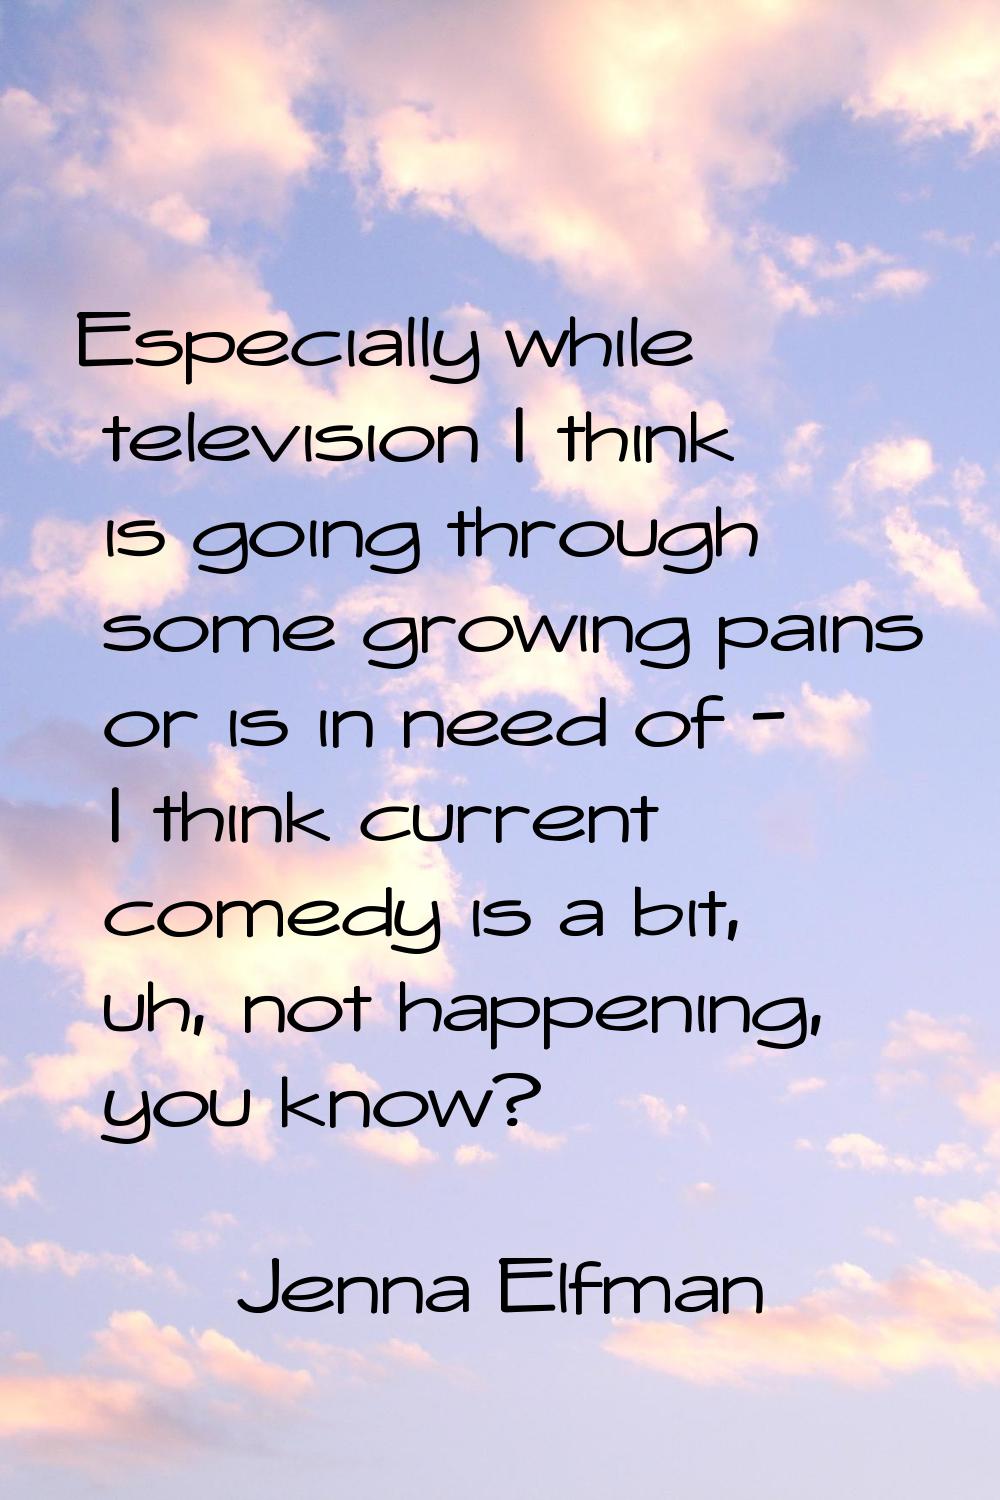 Especially while television I think is going through some growing pains or is in need of - I think 